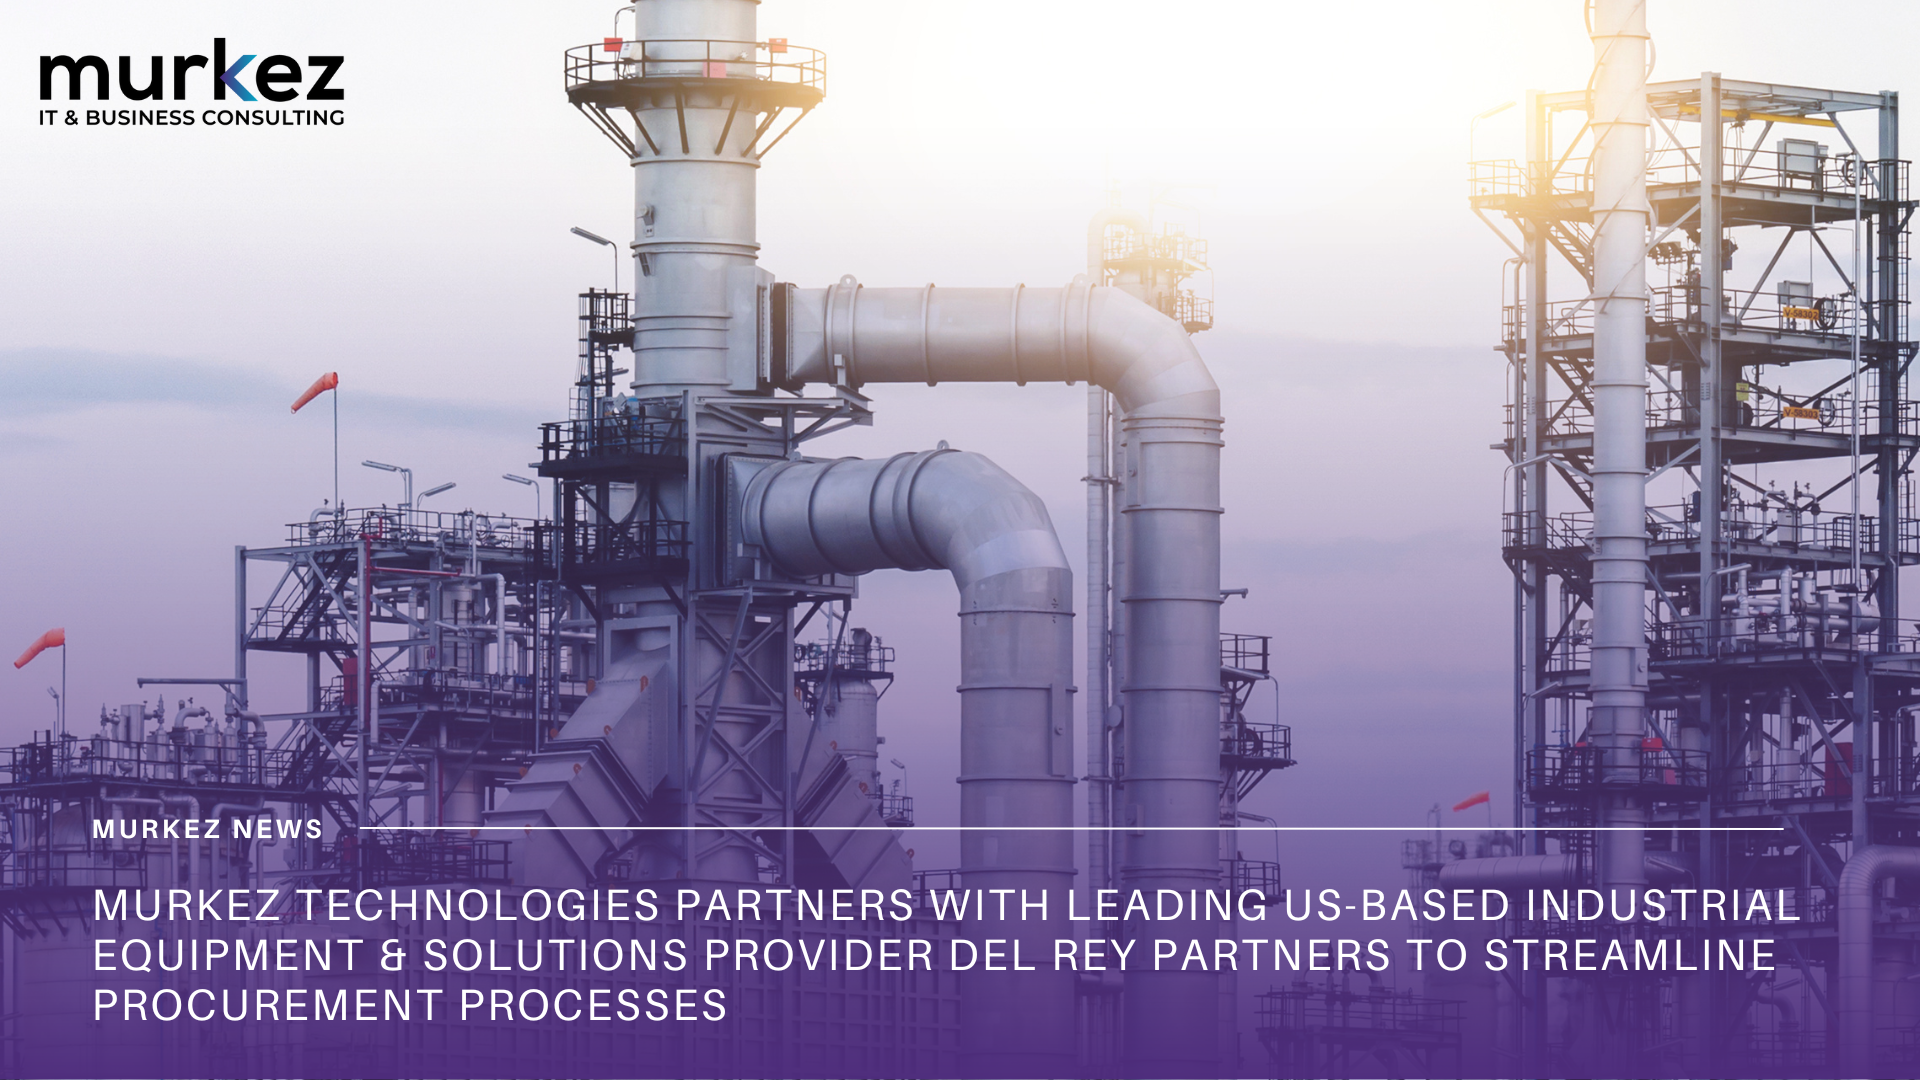 Murkez Technologies Partners with Leading US-Based Industrial Equipment & Solutions Provider Del Rey Partners to Streamline Procurement Processes